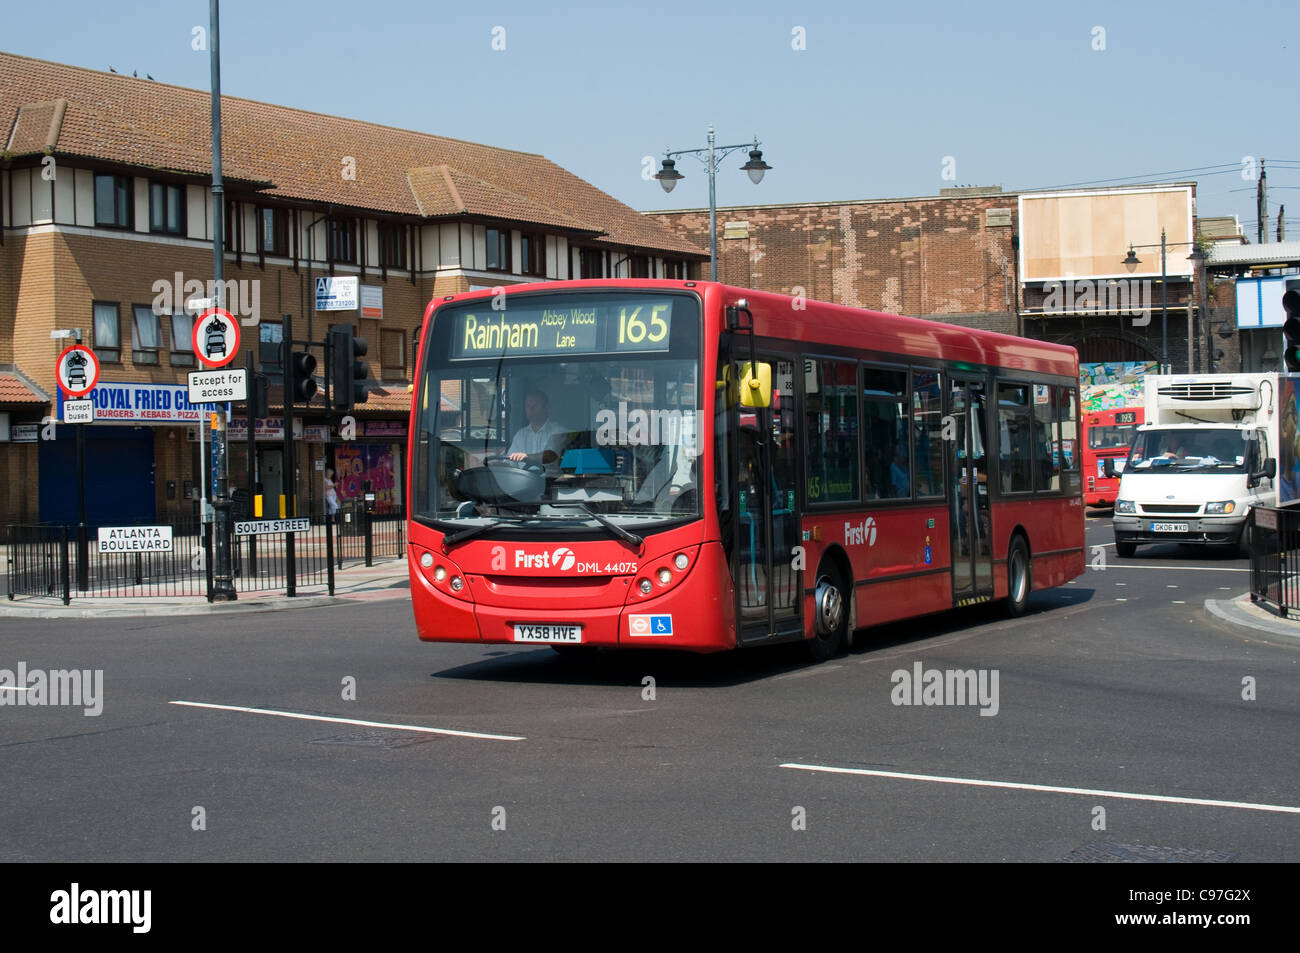 An Alexander Dennis Enviro 200 operated by First group passes along South Street, Romford. Romford Station is in the background. Stock Photo